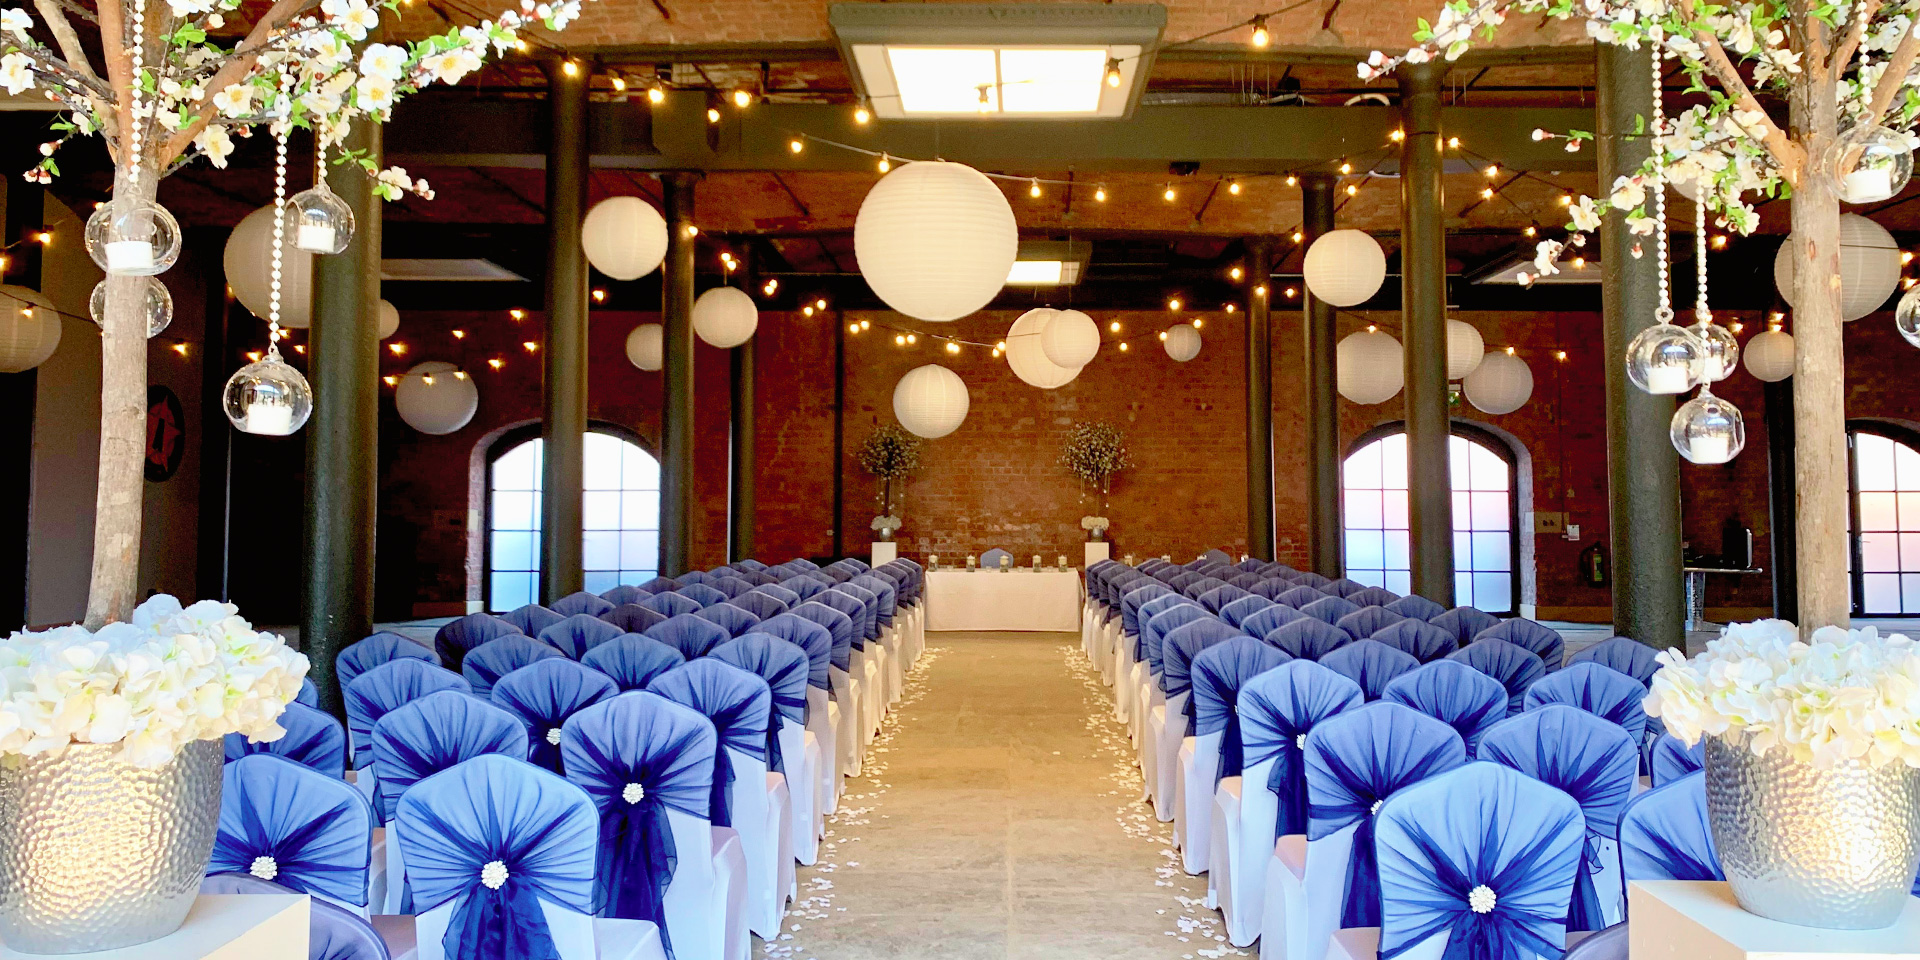 Event Venue Dressed in Navy & Pearl Wedding Theme